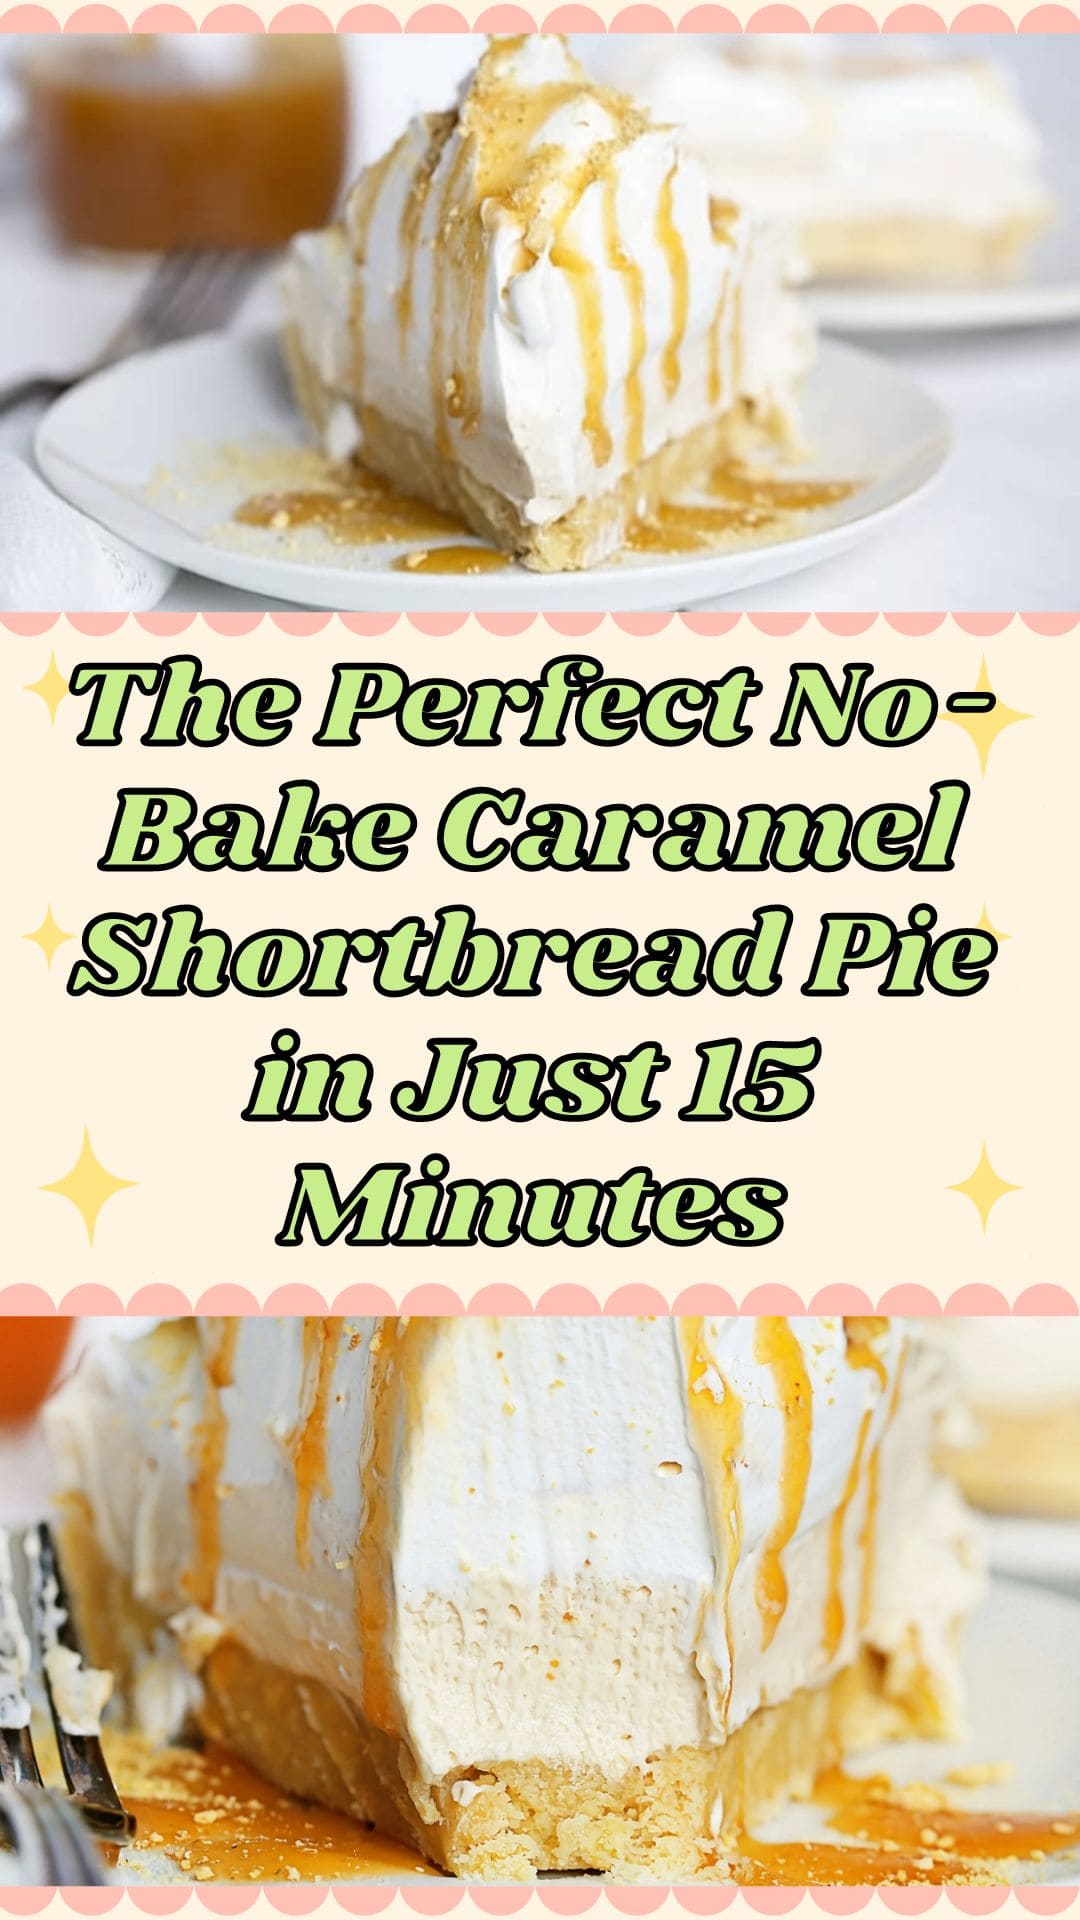 The Perfect No-Bake Caramel Shortbread Pie in Just 15 Minutes